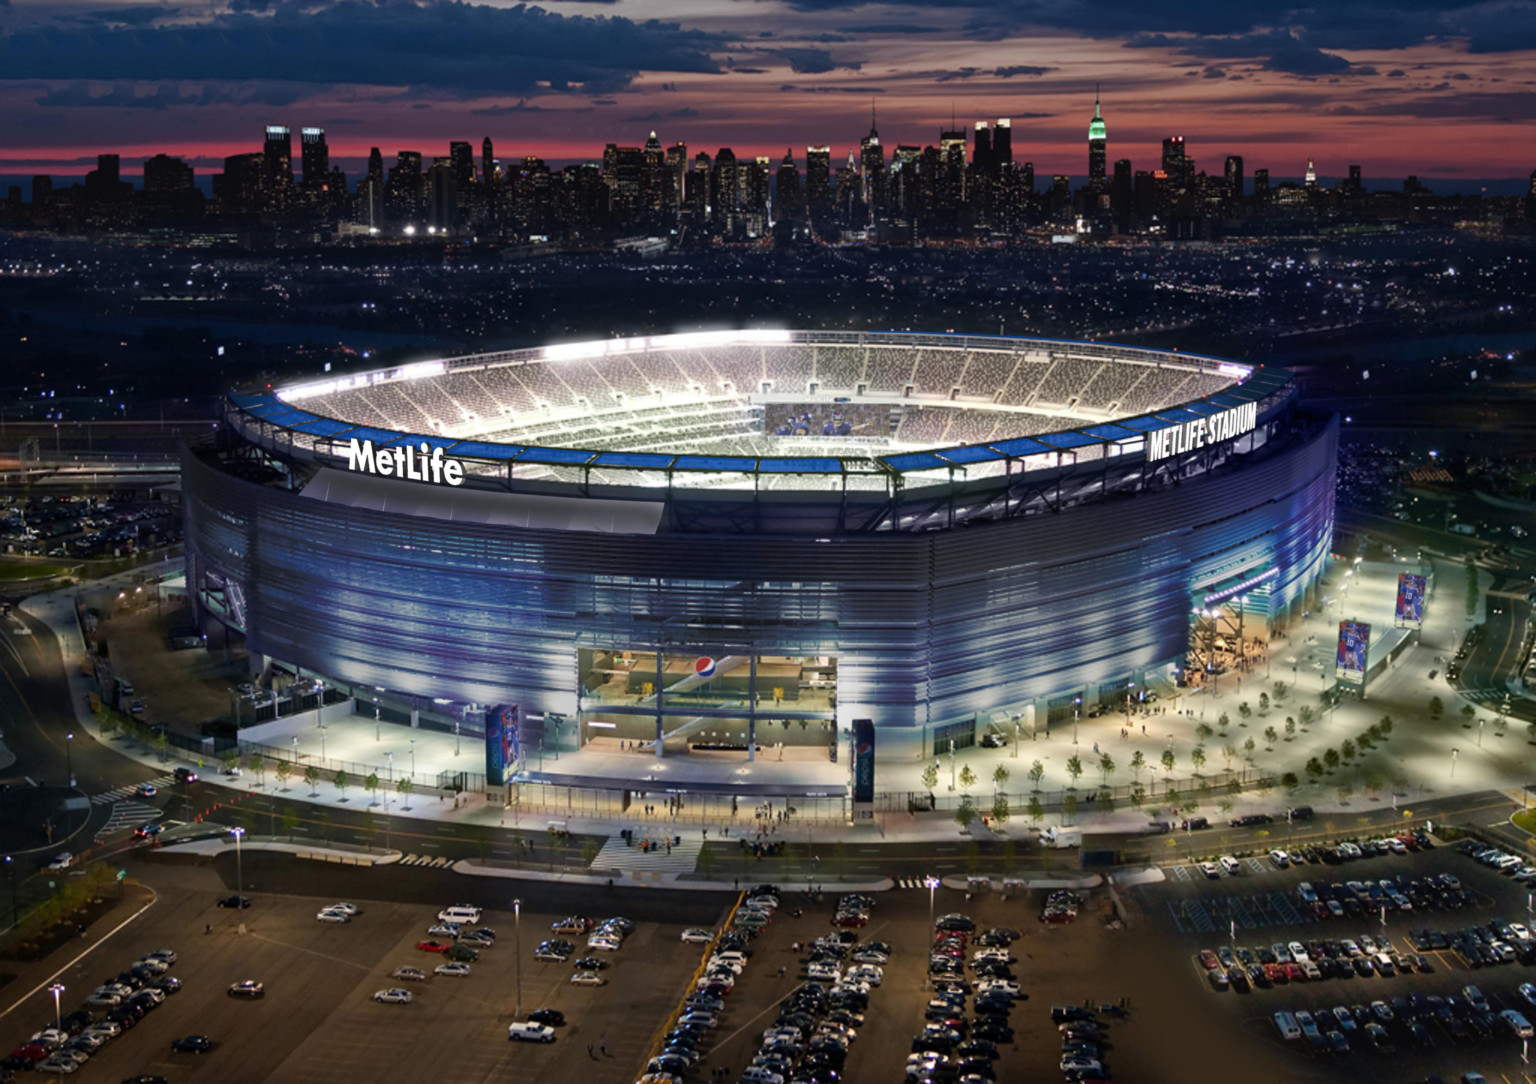 MetLife Stadium, home to the New York Jets and Giants, illuminated at night, encircled by LED solar panels and blue facade